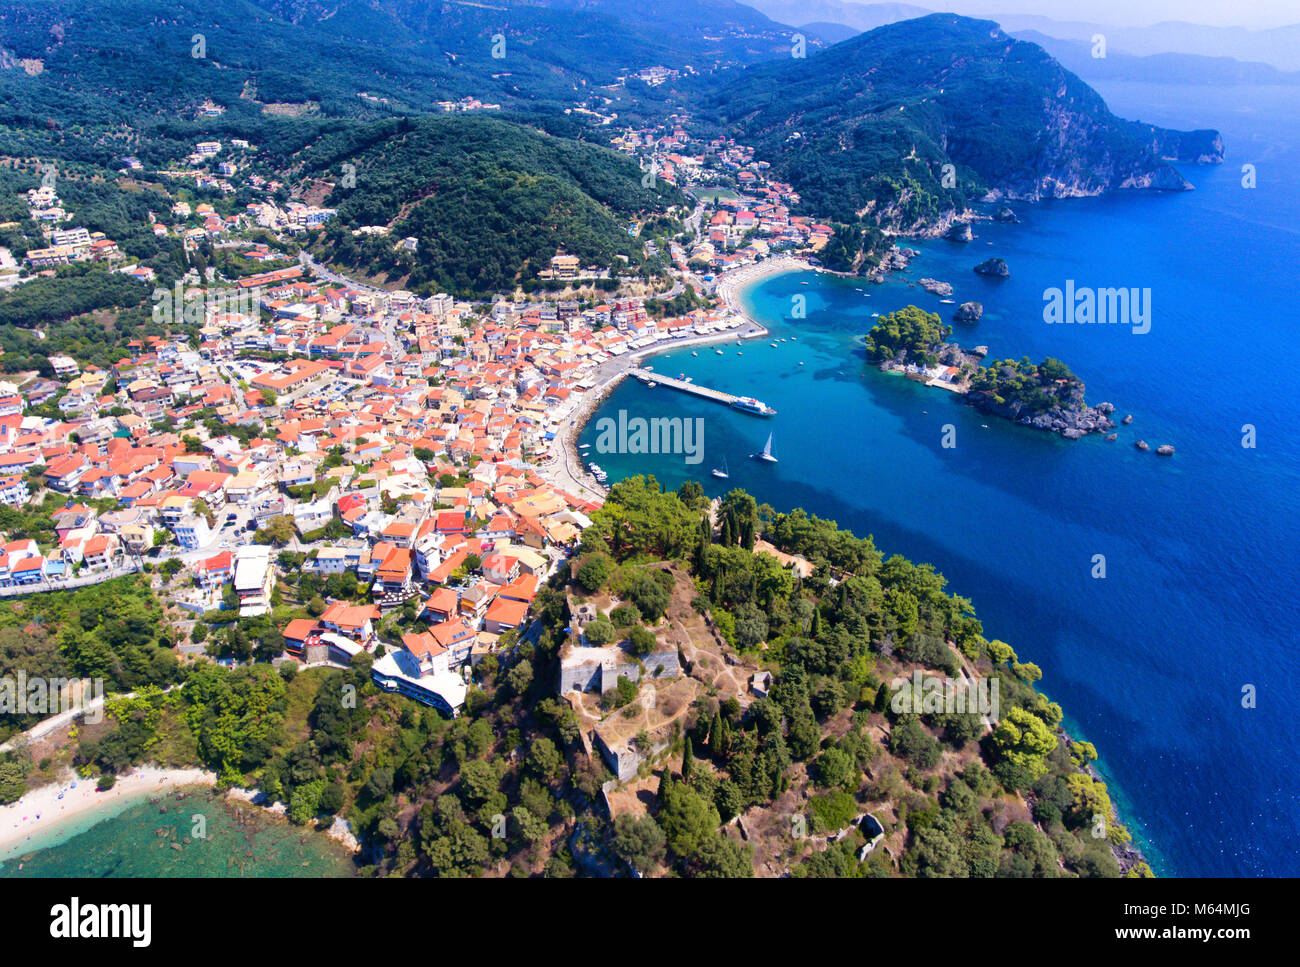 Parga Castle and old village seen from above. Epirus region, Greece. Aerial image. Stock Photo